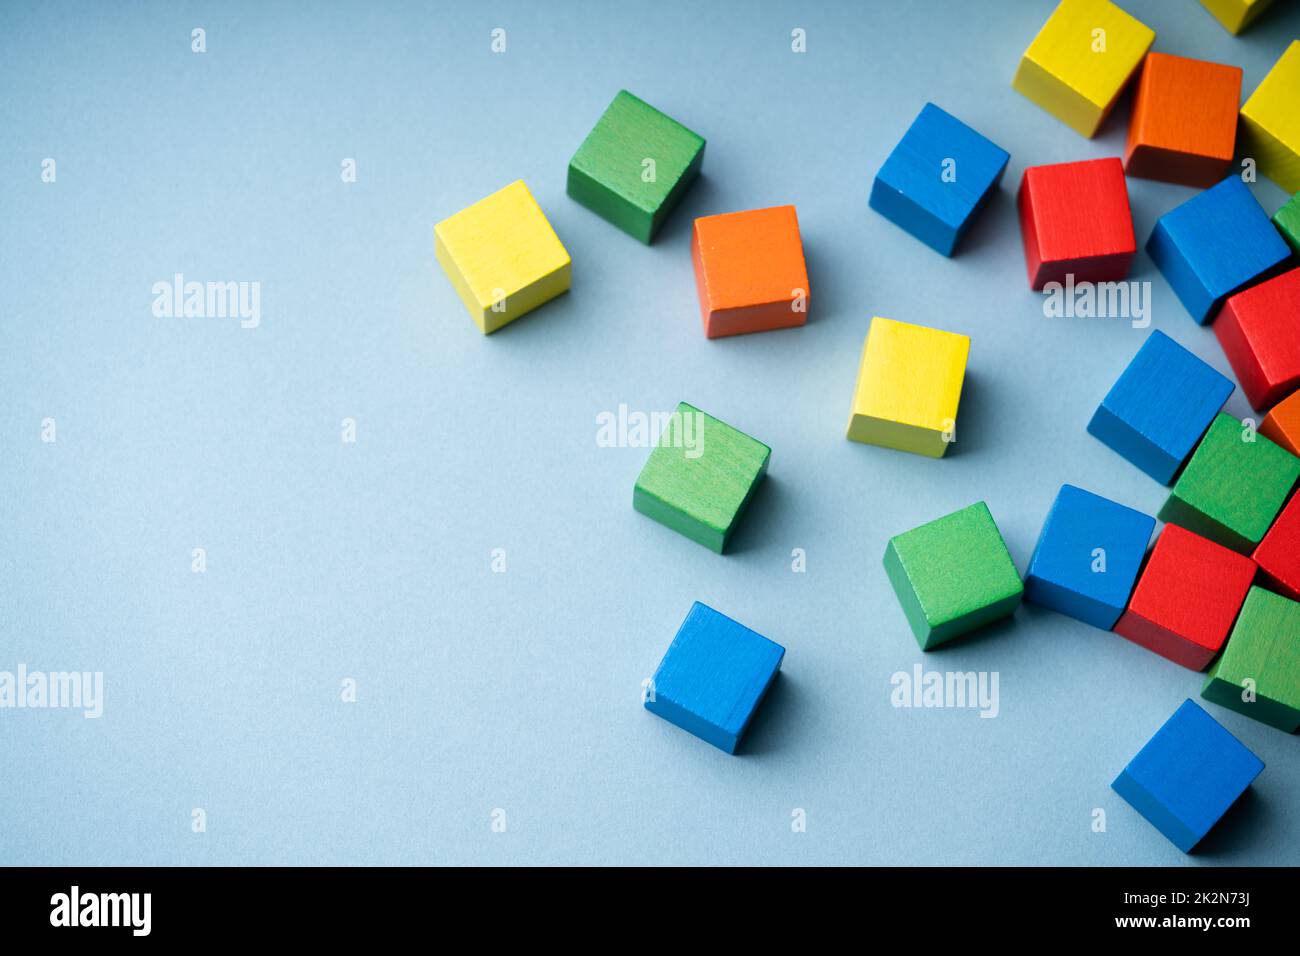 Colorful Child Cubic Construction Stock Photo